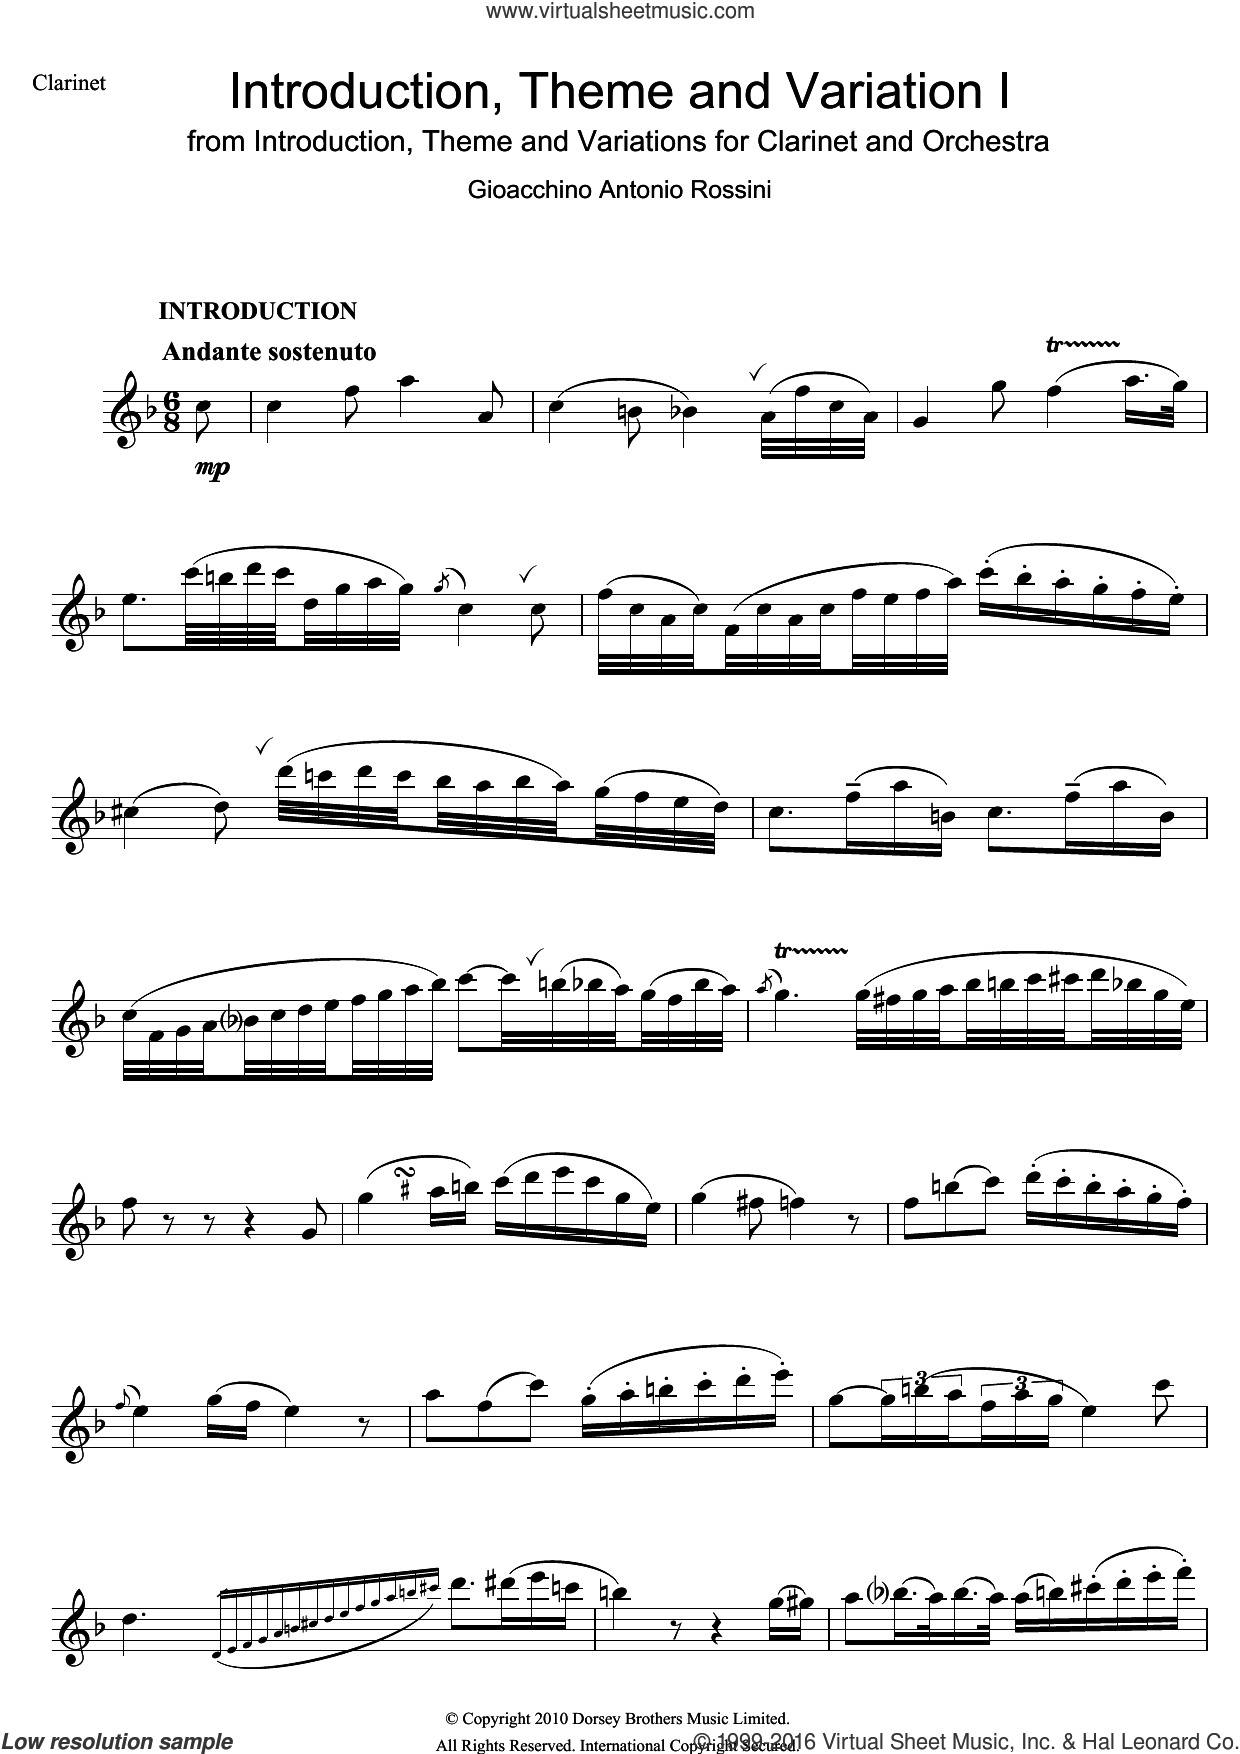 Introduction Theme And Variations Rossini Pdf File